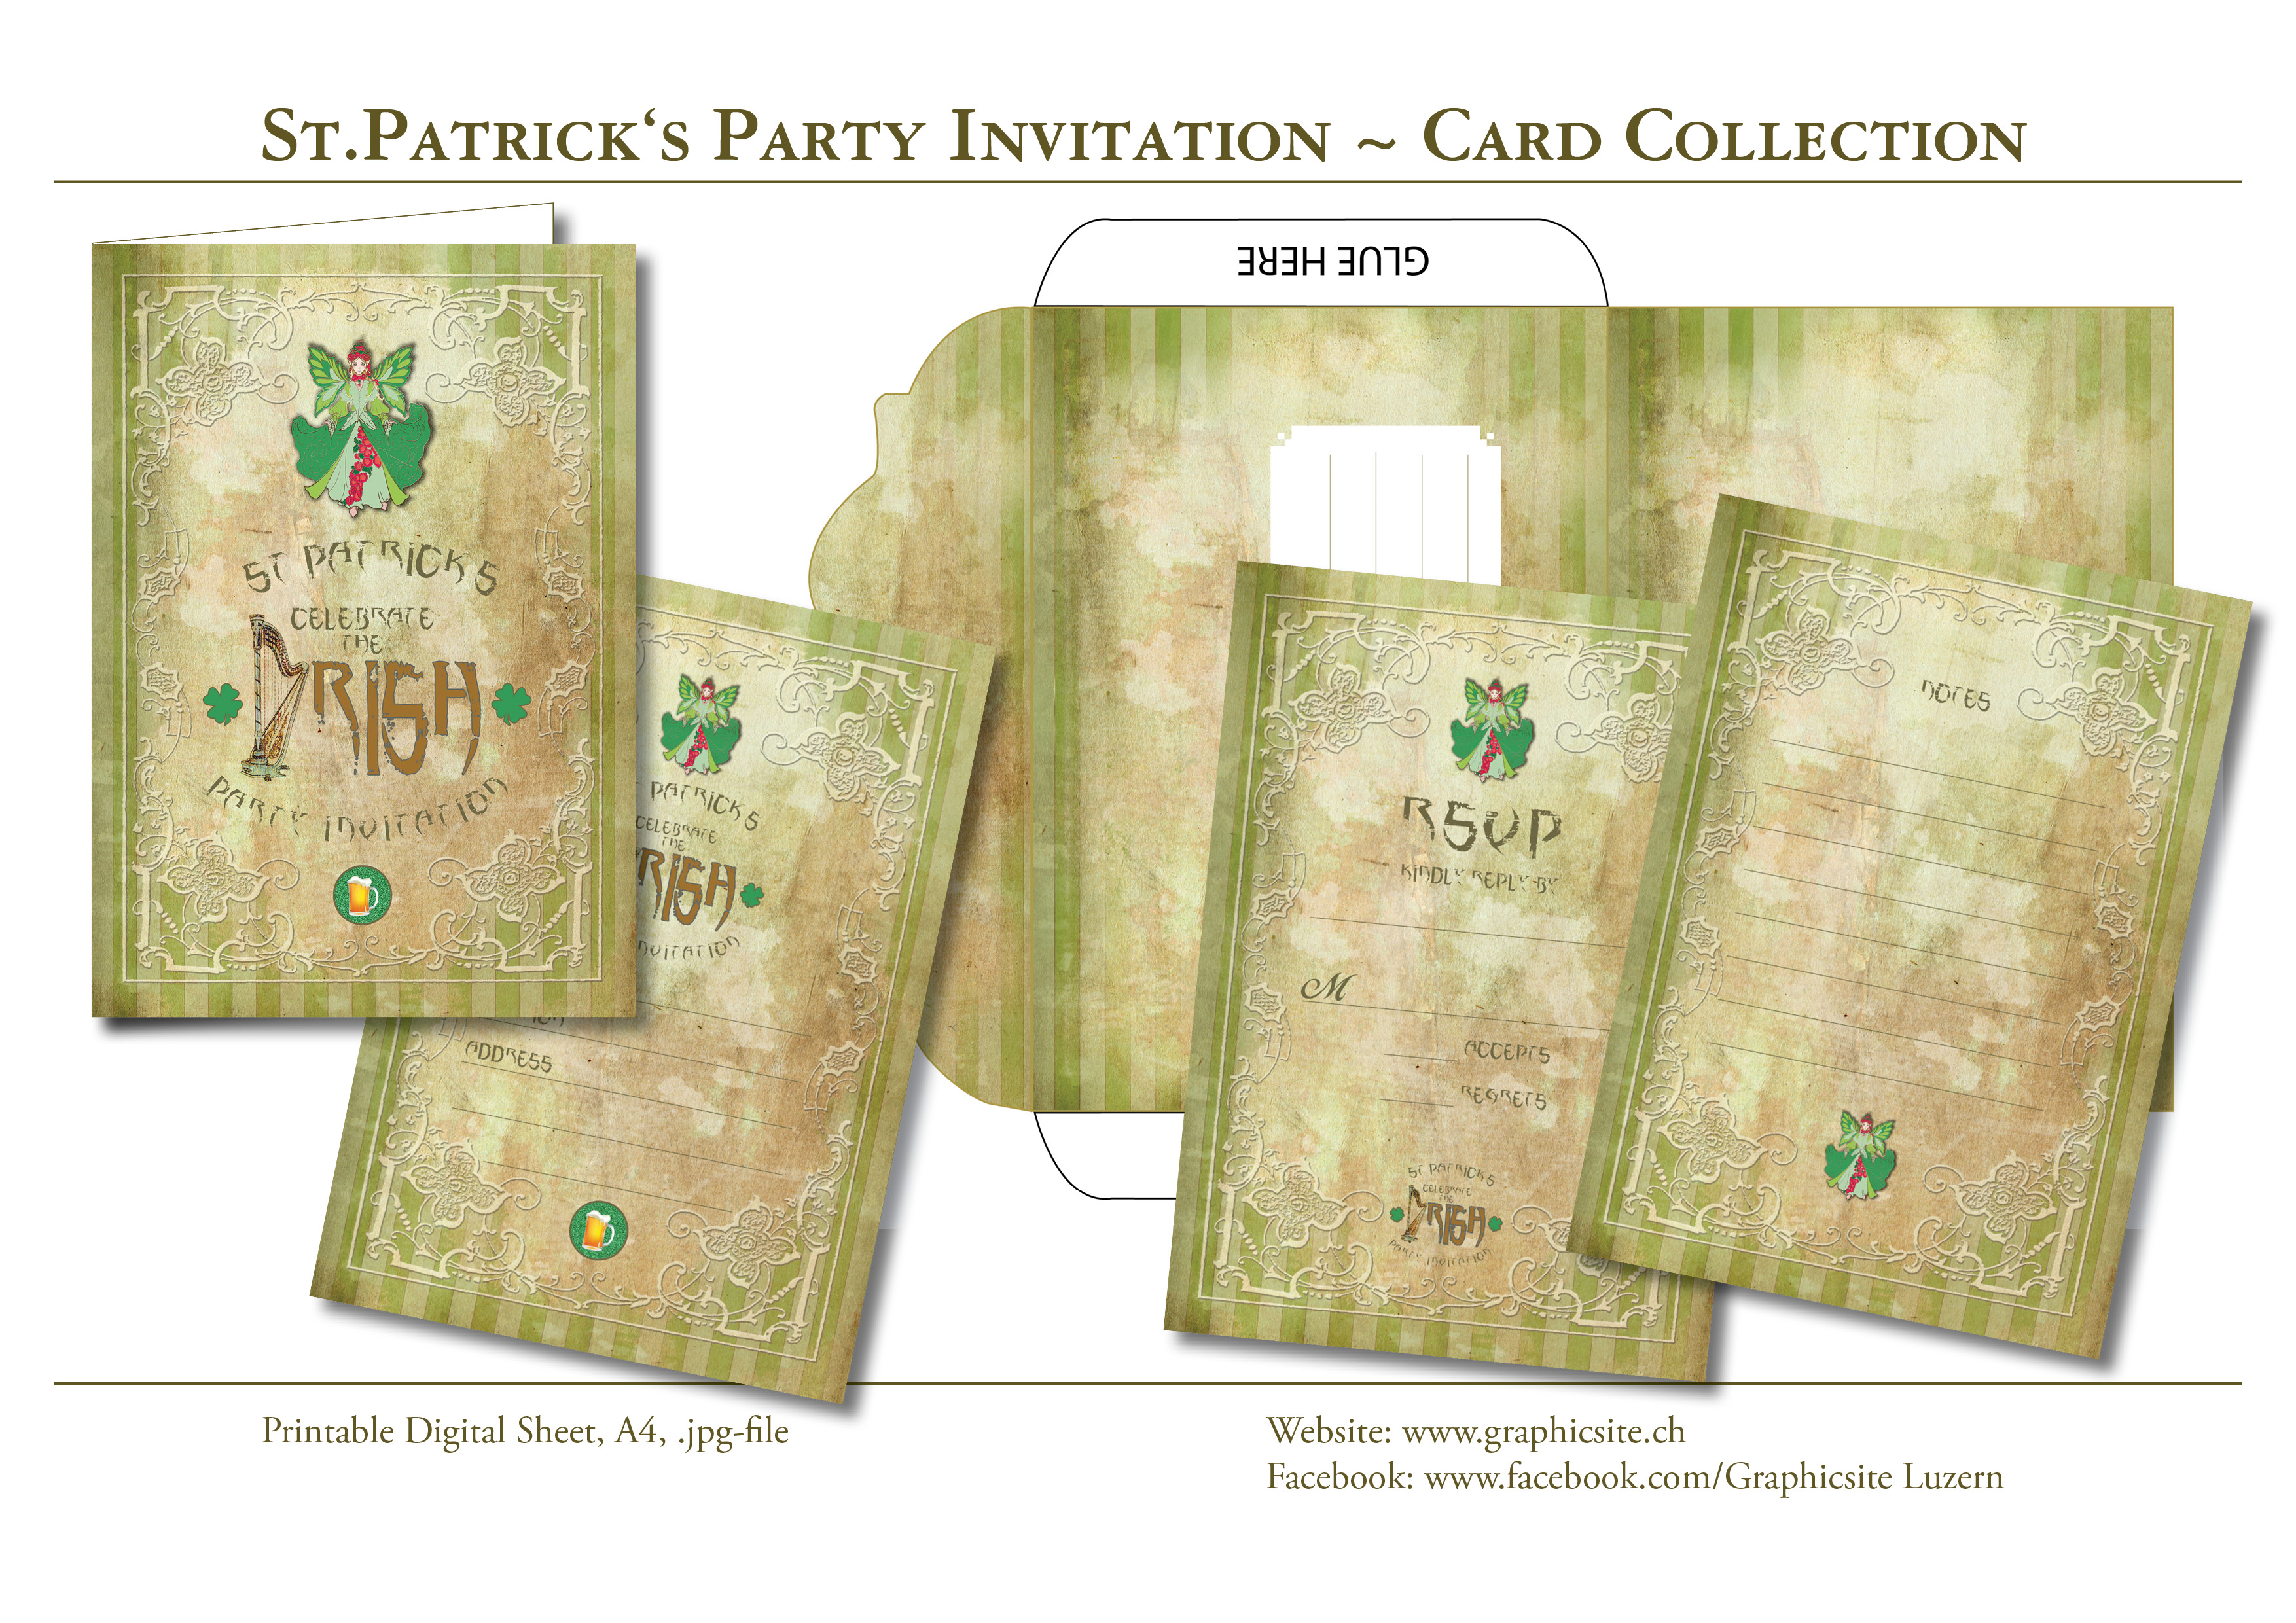 Printable Digital Sheets - DIN A-Formats - St.Patricks Party Invitation Collection - Invites, #cards, #greetingcards, #stpatricksday, #grunge, #fairy, #beer, #paper, #stationary, #luzern, #schweiz,